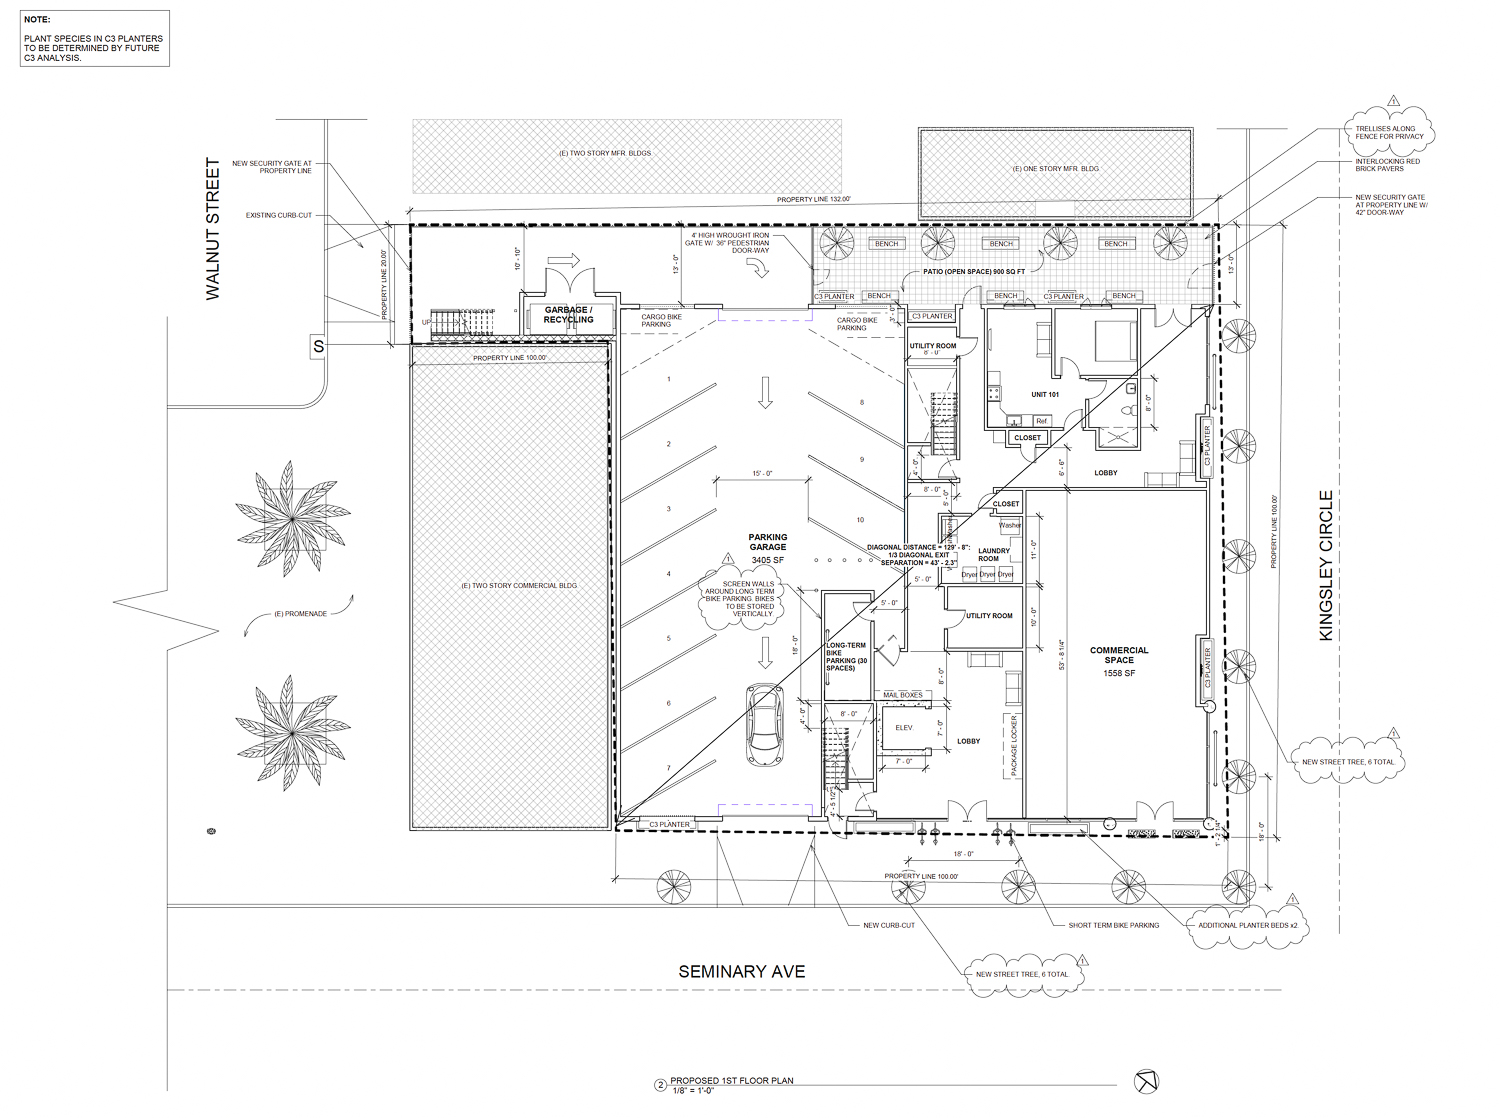 2611 Seminary Avenue ground-level floor plan, rendering by Giovani Rodriguez